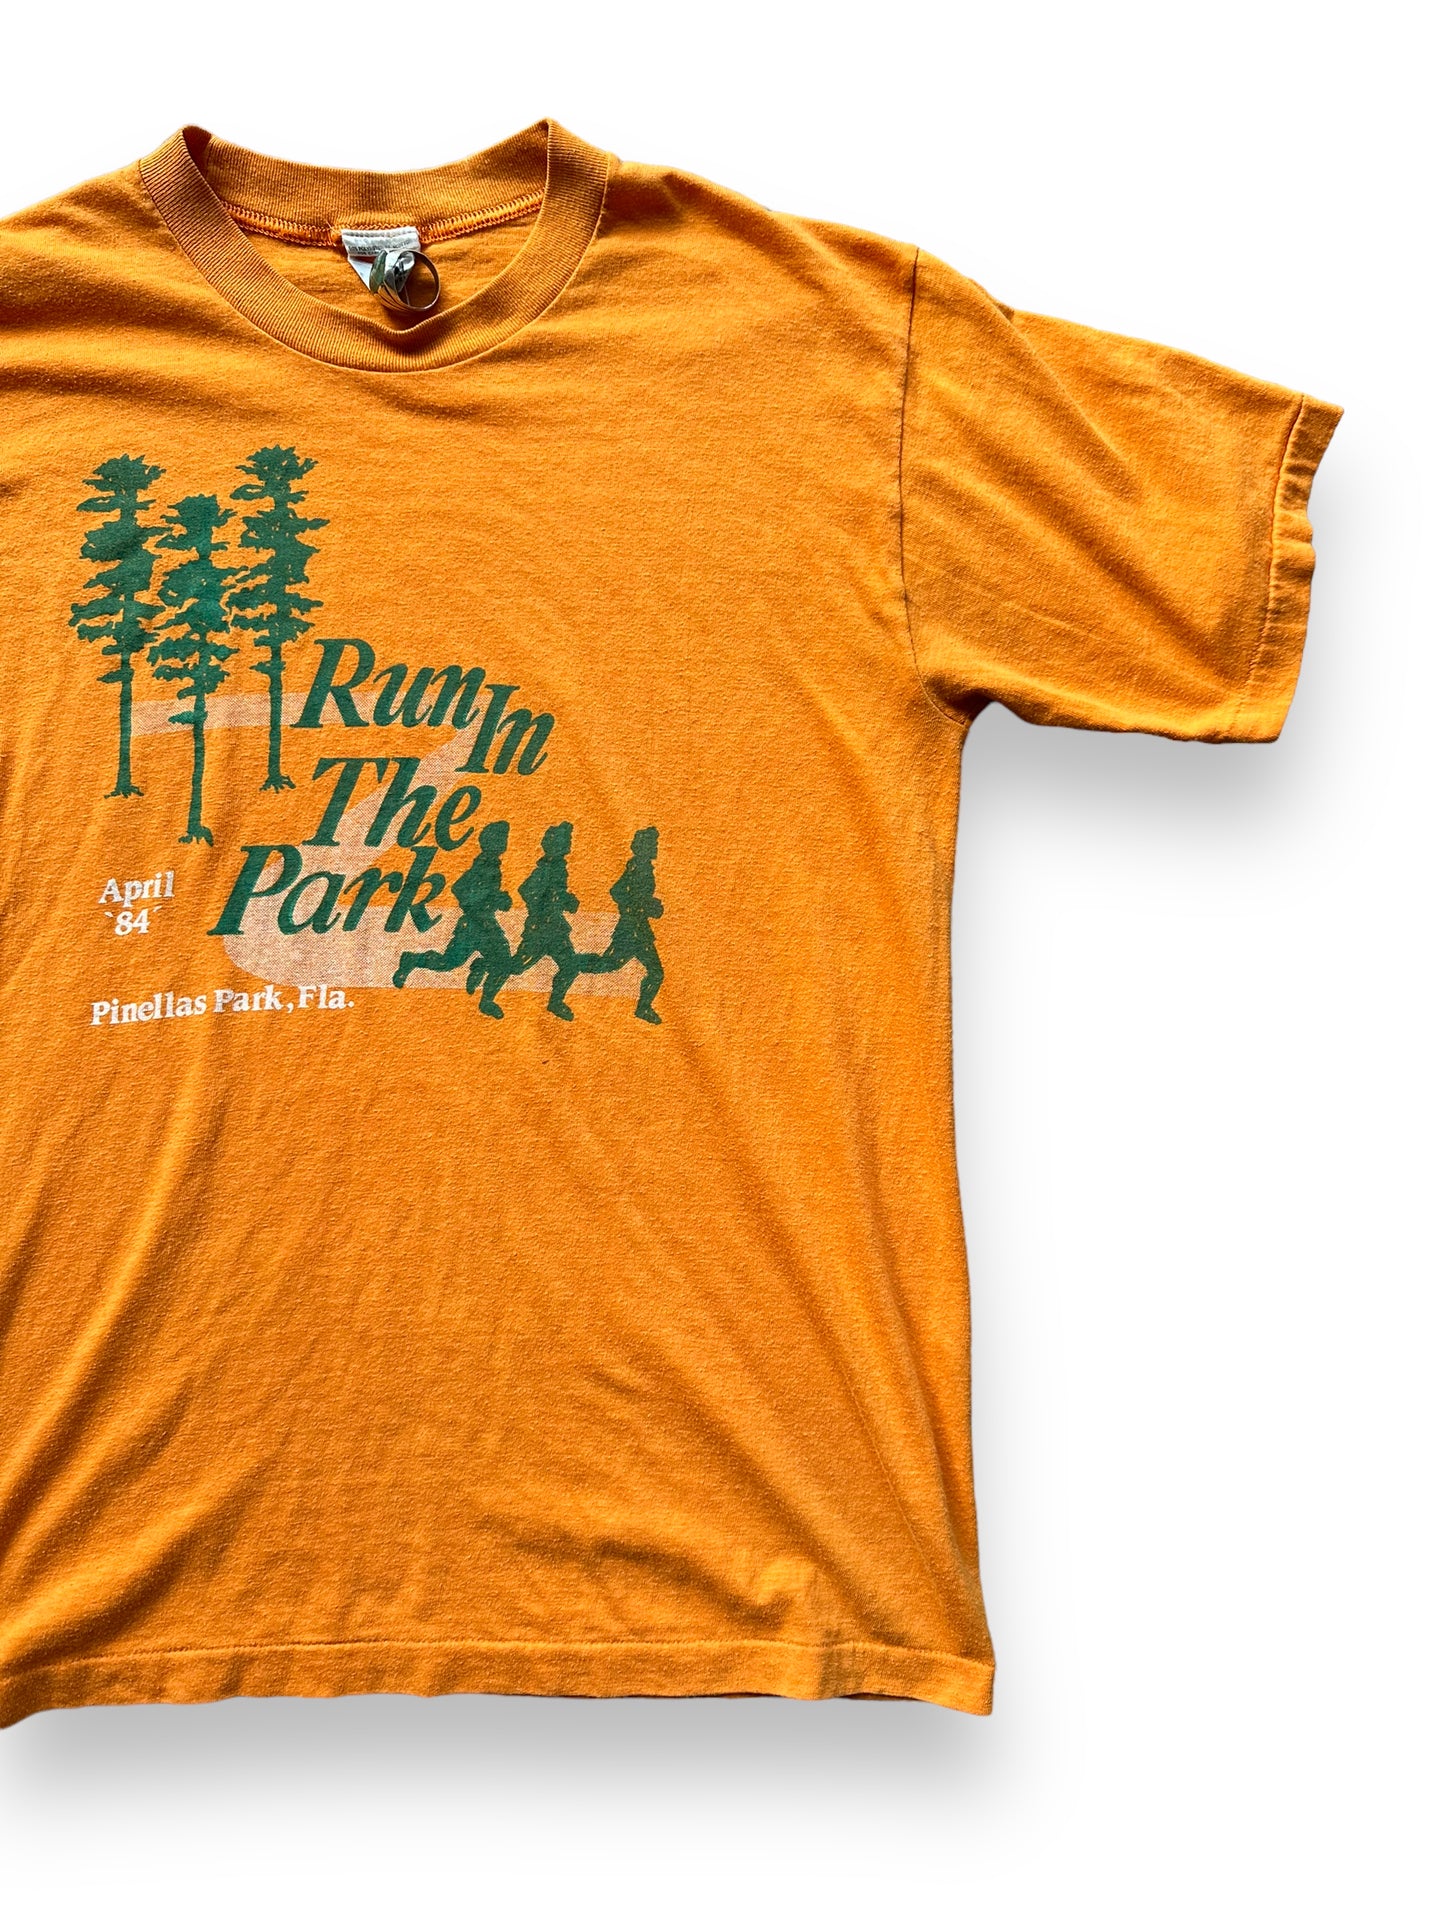 Front Left View of 1984 Run in the Park Tee SZ L | Vintage Graphic T-Shirts Seattle | Barn Owl Vintage Tees Seattle